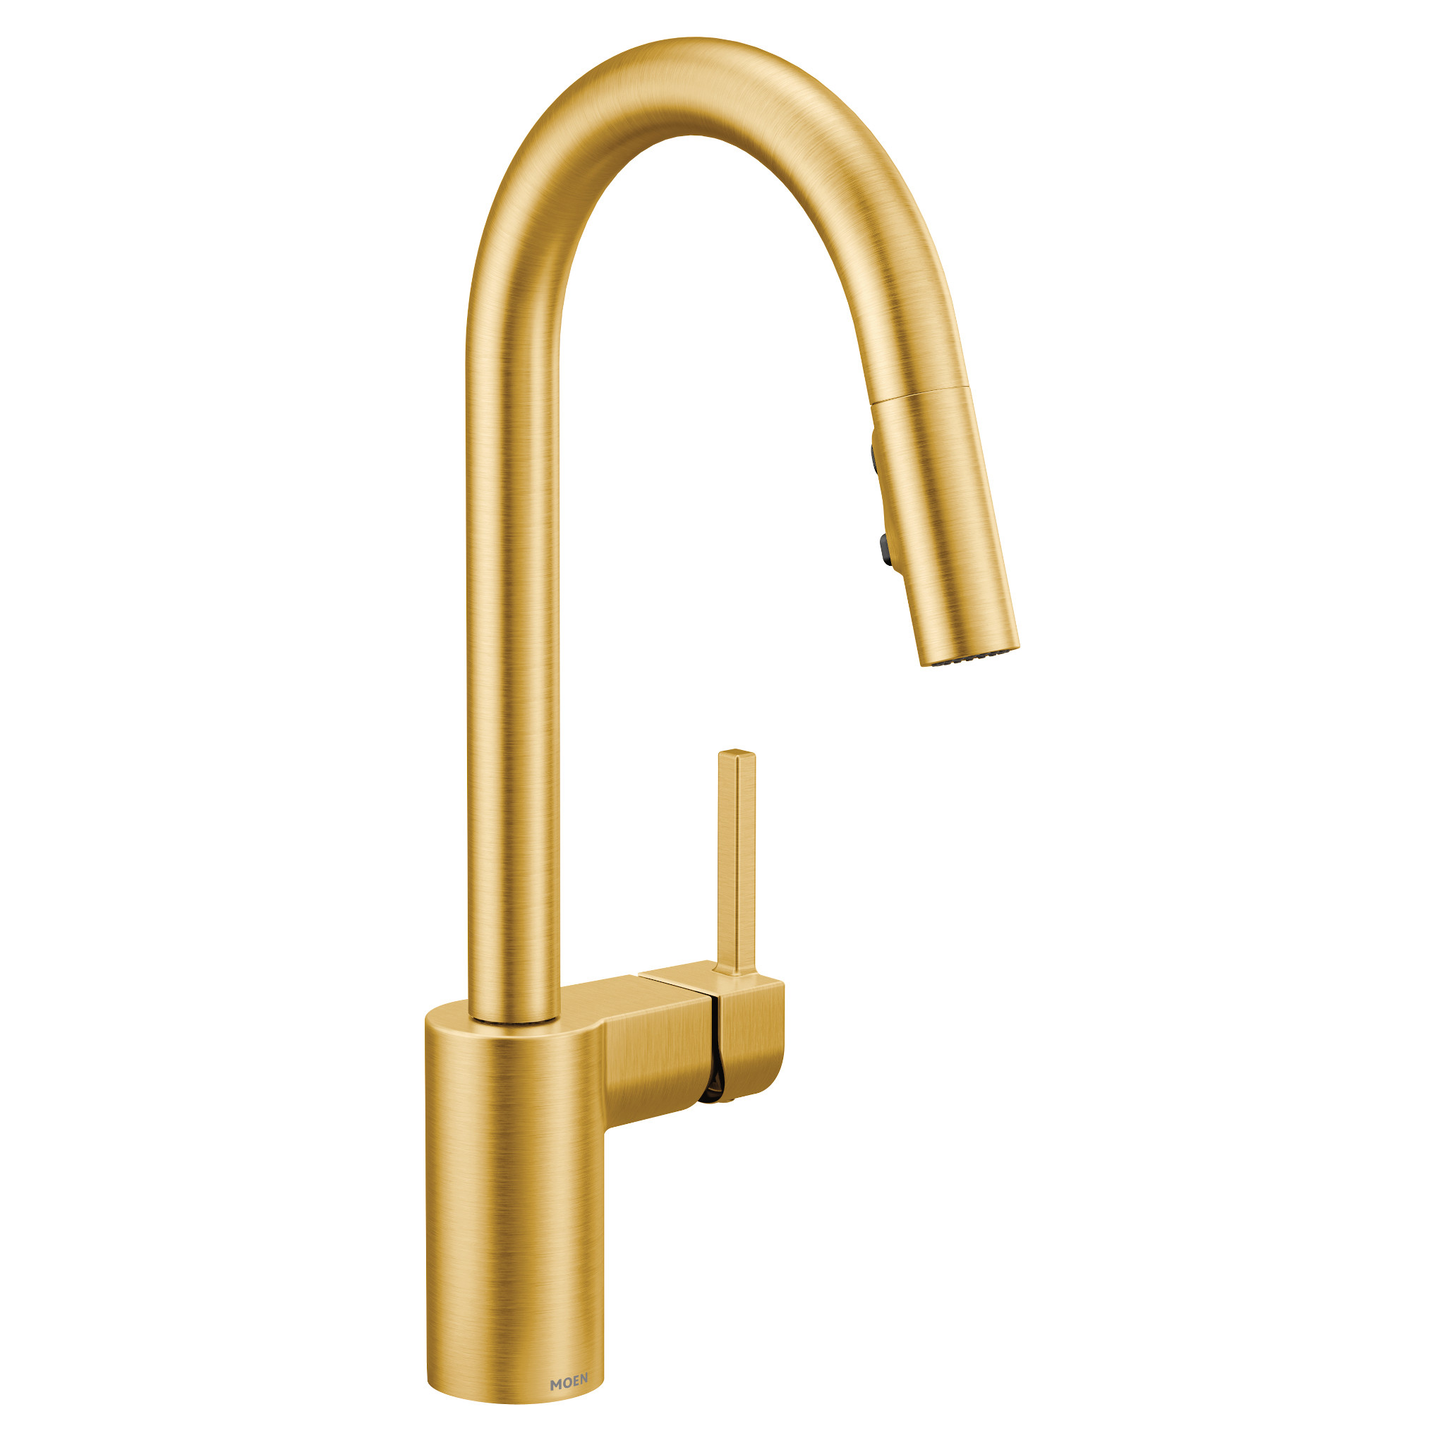 Align One-Handle High Arc Pulldown Kitchen Faucet